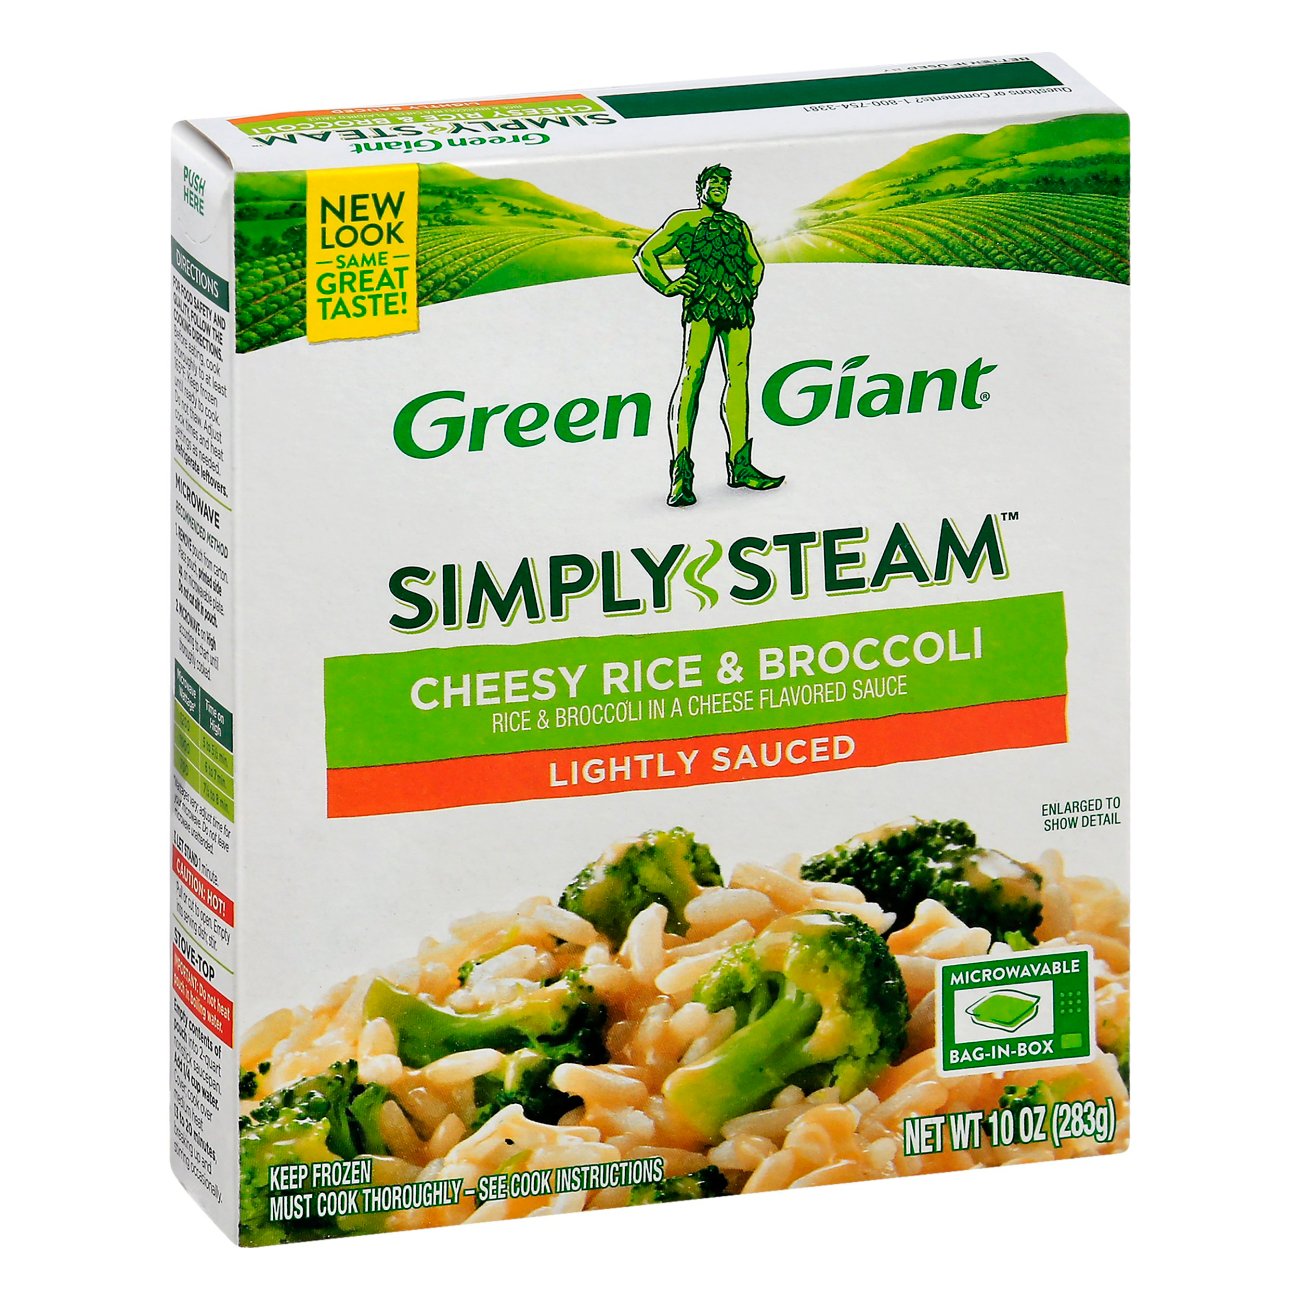 Green Giant Cheesy Rice & Broccoli - Shop Mixed Vegetables at H-E-B